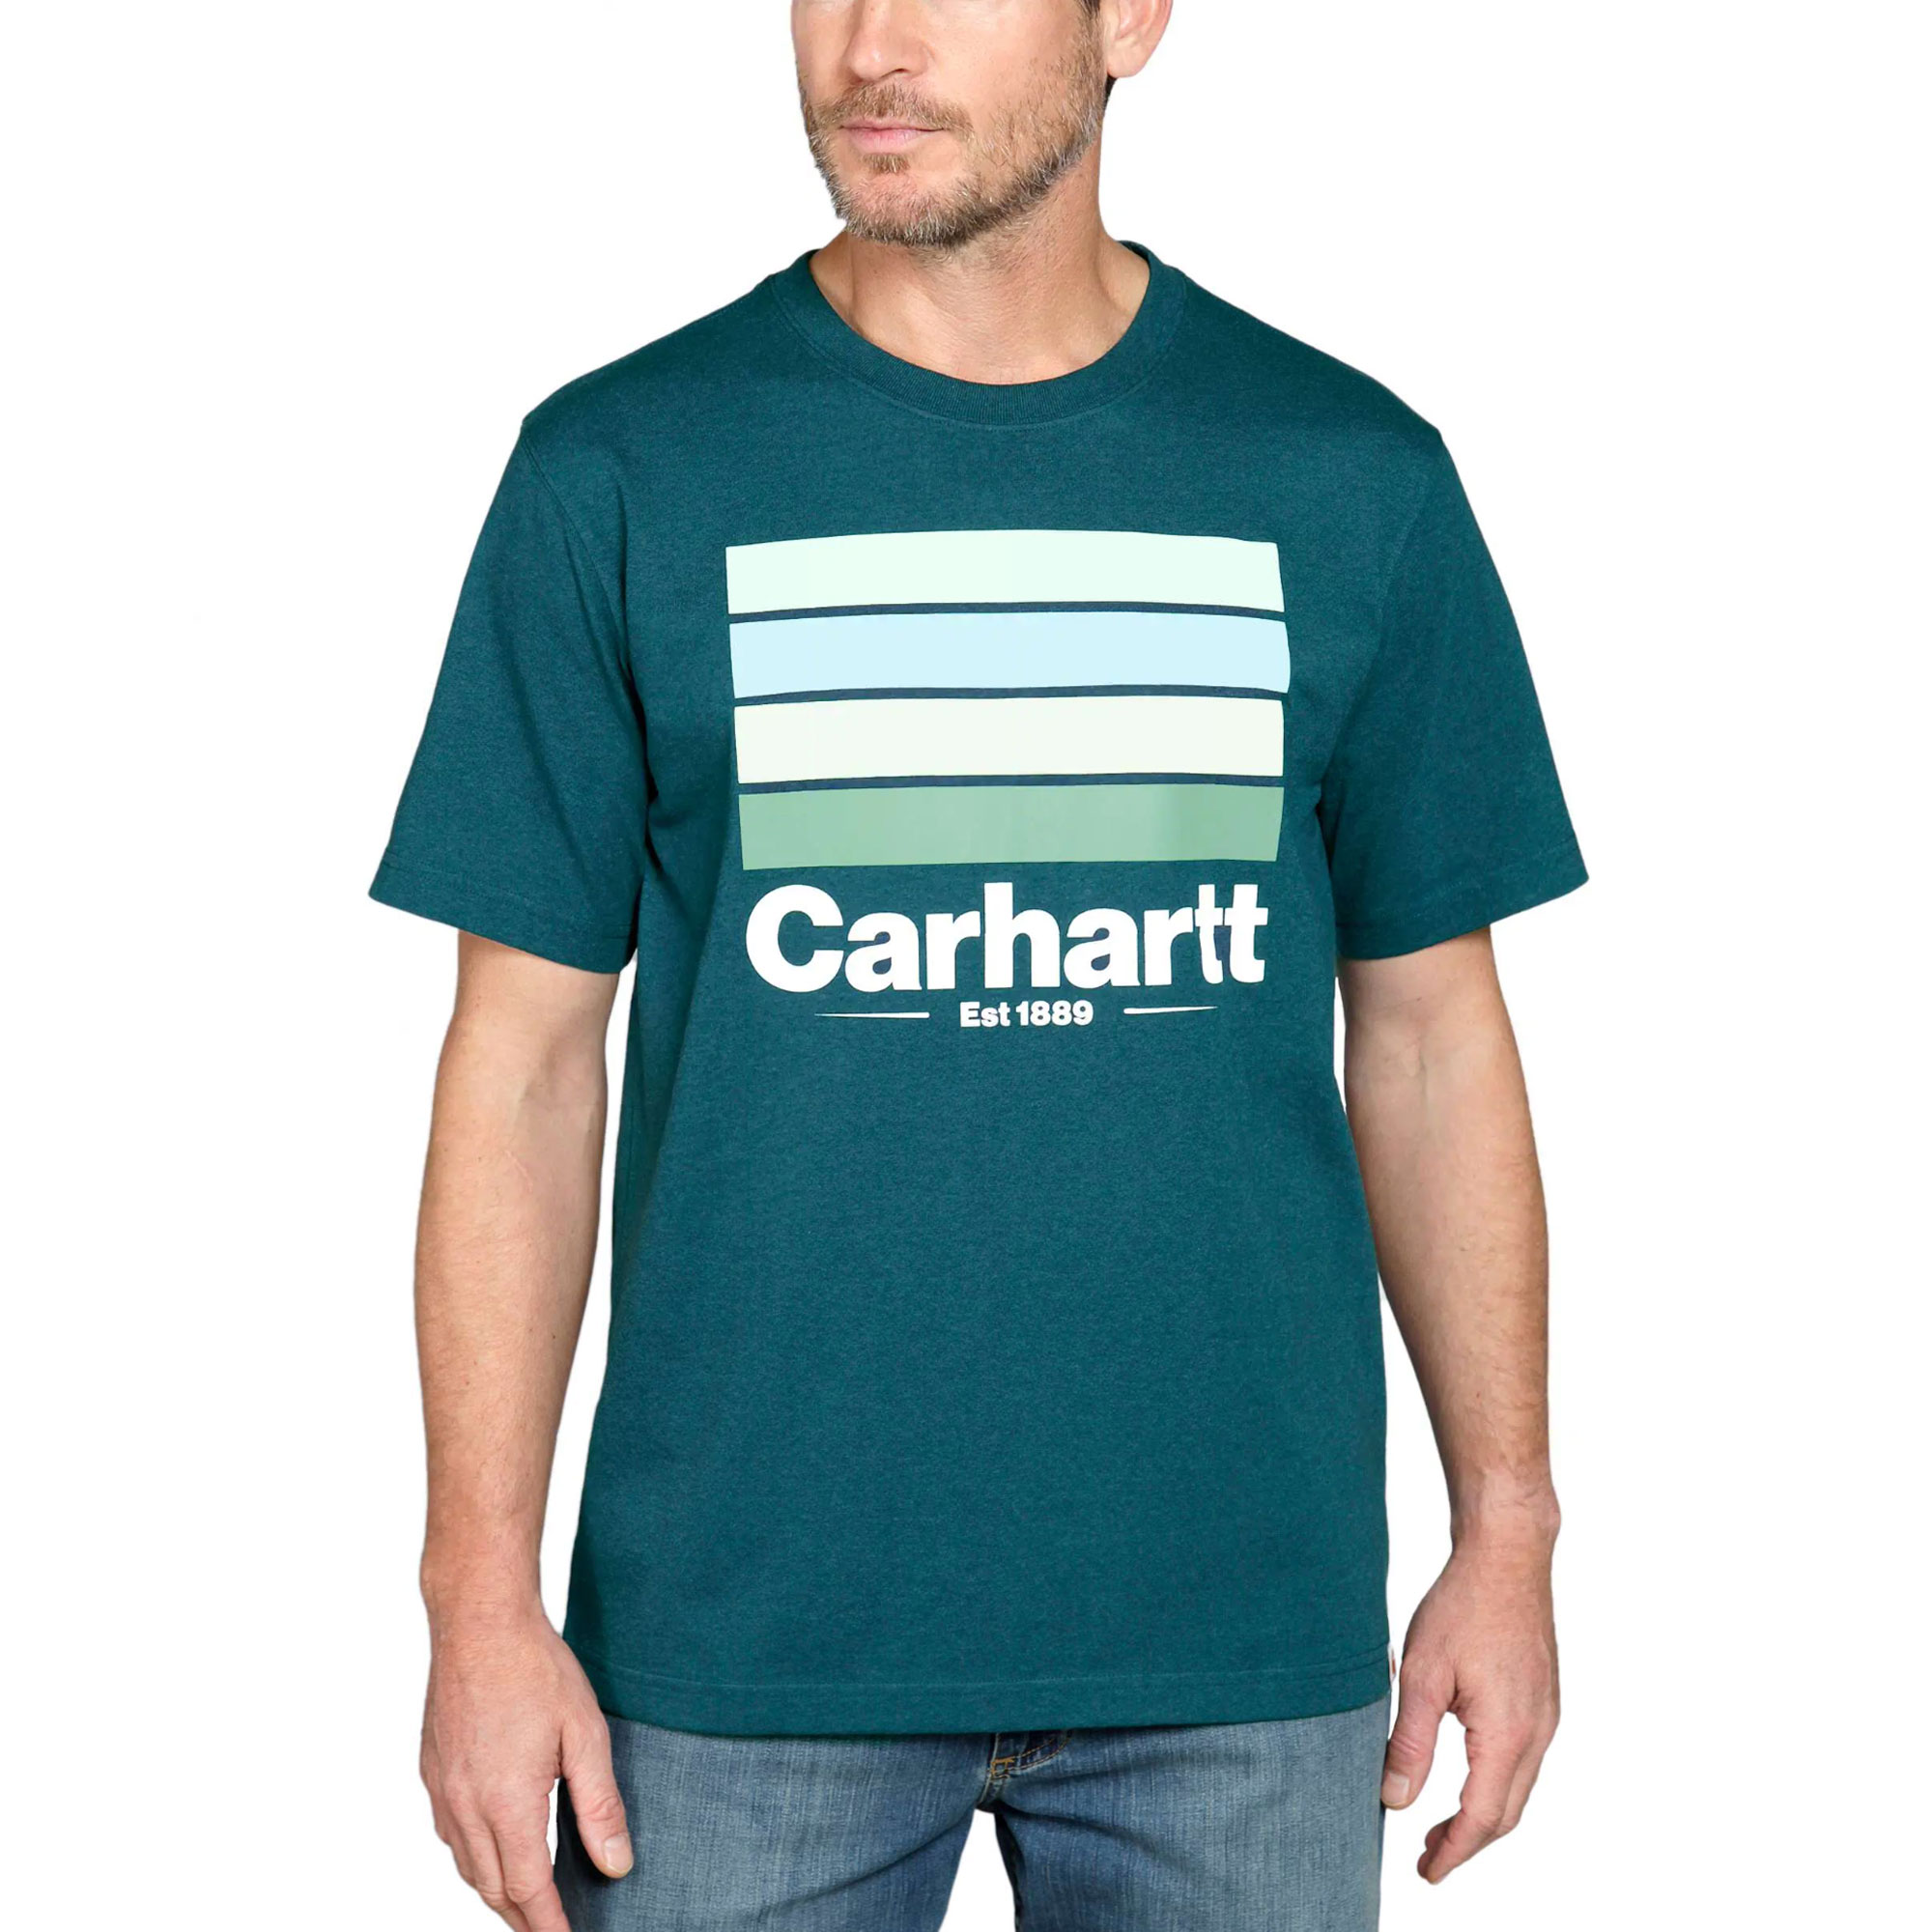 Carhartt Relaxed Fit Heavyweight S/S Line Graphic T-Shirt nachtblau